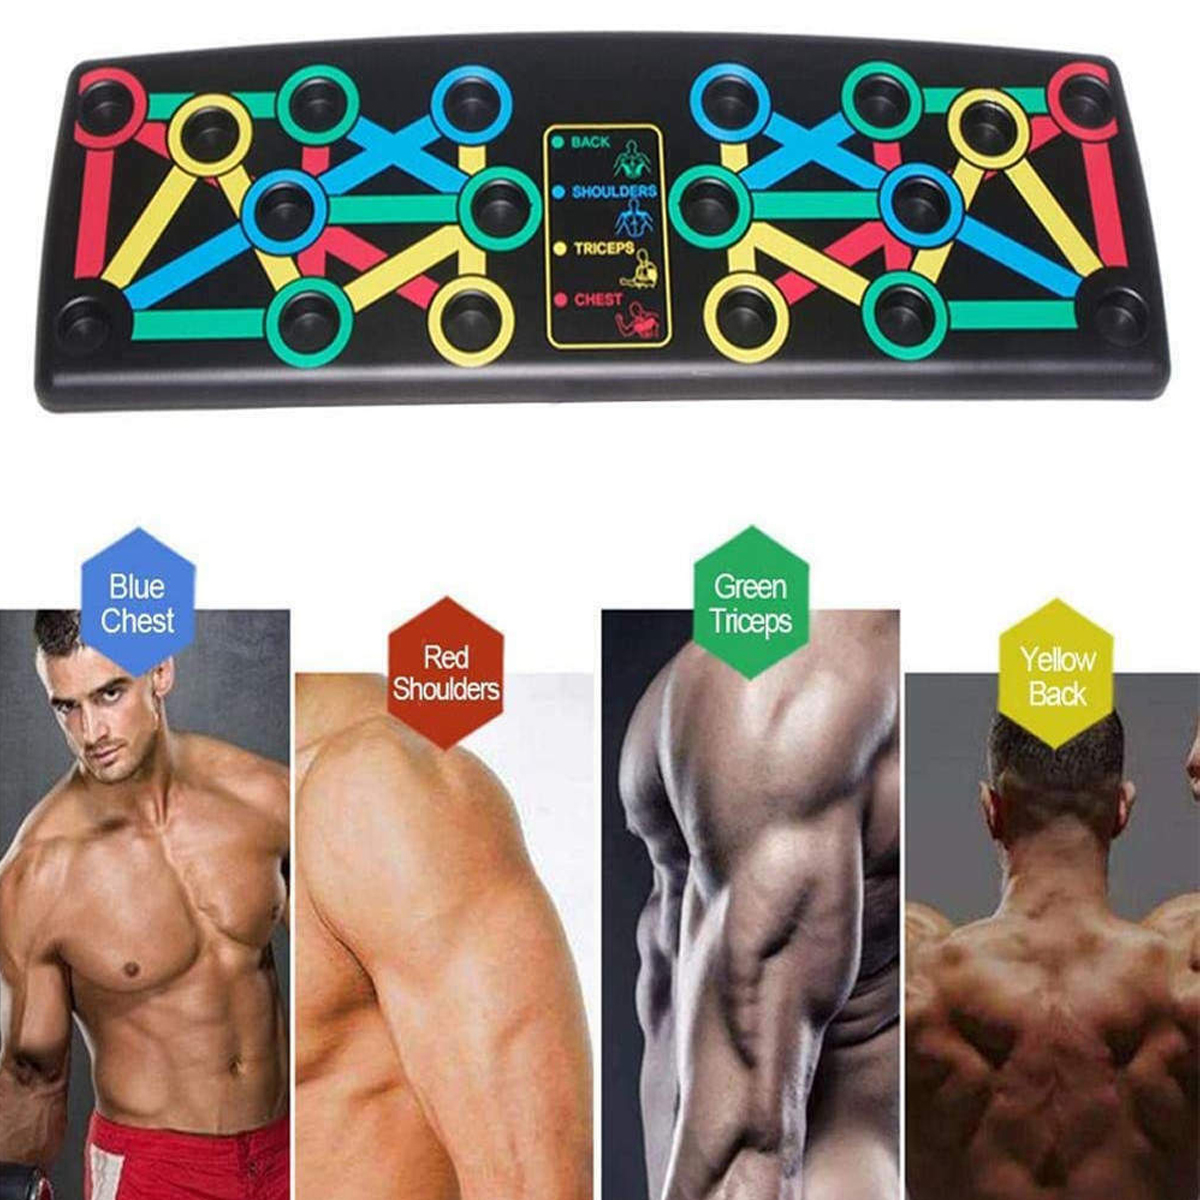 14-In-1-Foldable-Push-Up-Stand-Board-Home-Gym-Push-up-Chest-Muscle-Training-Fitness-Equipment-1667691-3